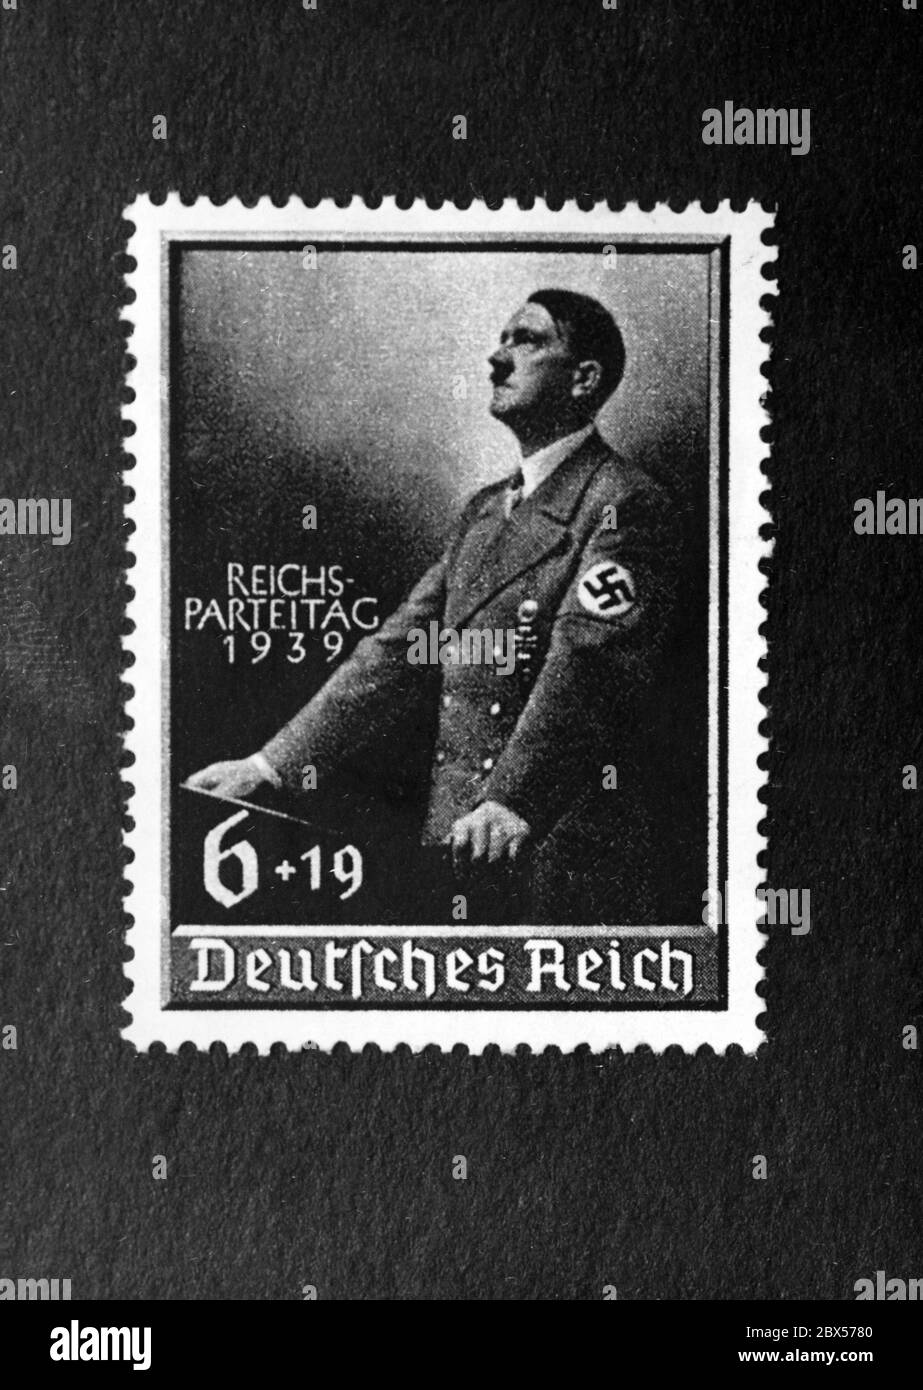 The postage stamp issued by the German Reichspost on the occasion of the Reich Party Congress of Peace shows a portrait of Adolf Hitler. The stamp is sold for 6 Pfennig plus a surcharge of 19 Rpf. for Adolf Hitler's cultural fund. Stock Photo